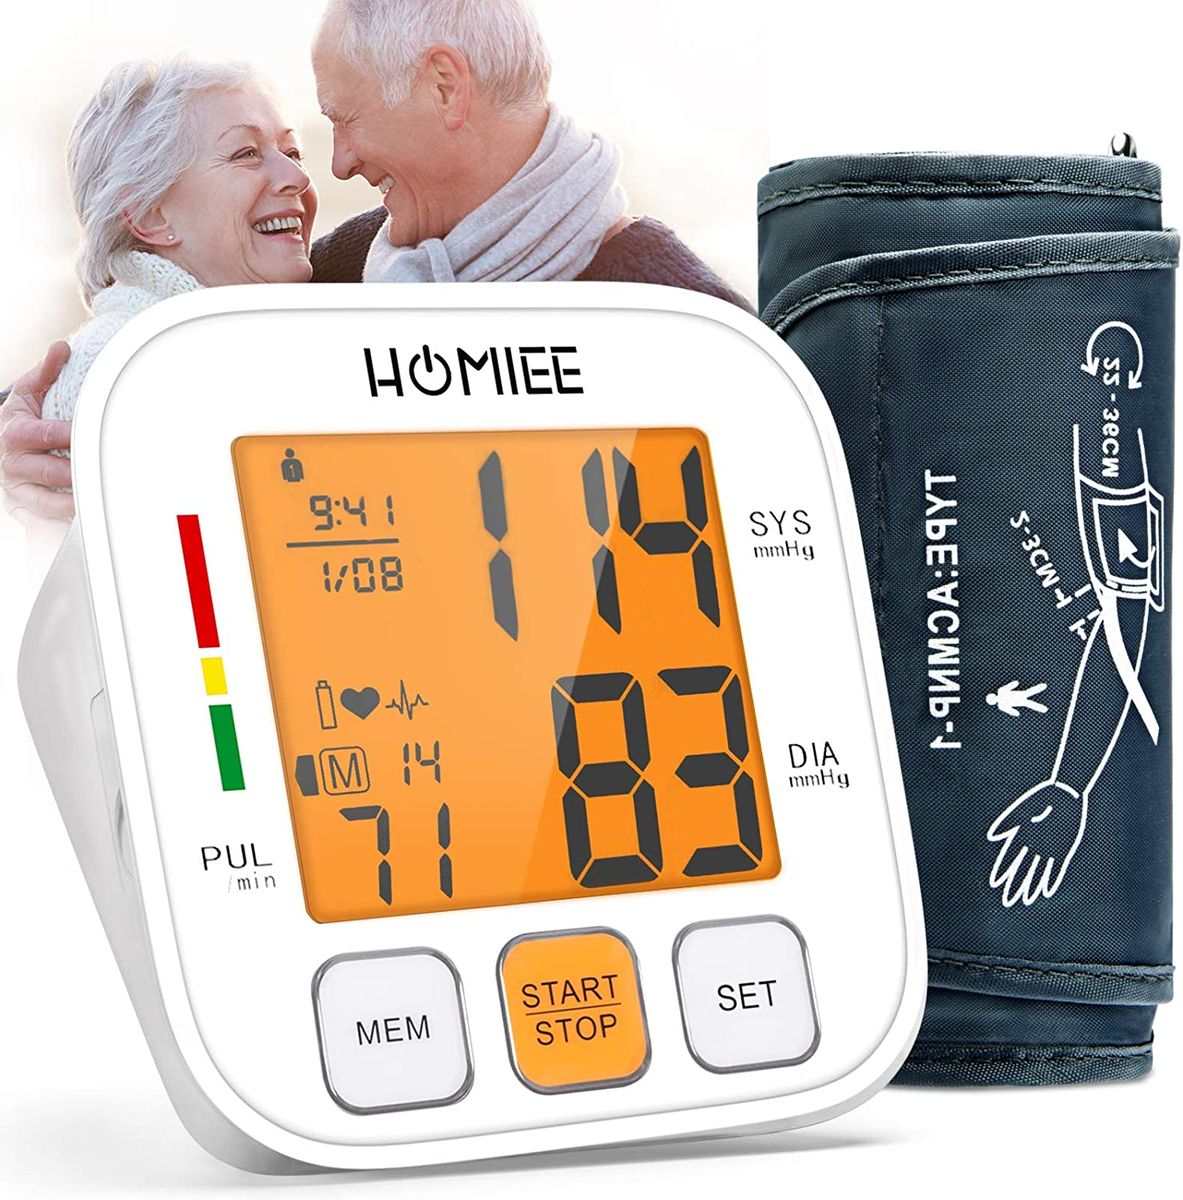 HOMIEE Upper Arm Blood Pressure Monitor, Digital Automatic Blood Pressure Monitor and Pulse Measurement, Blood Pressure Gauges with Heart Rate Display and Backlight Large LED Screen A-White